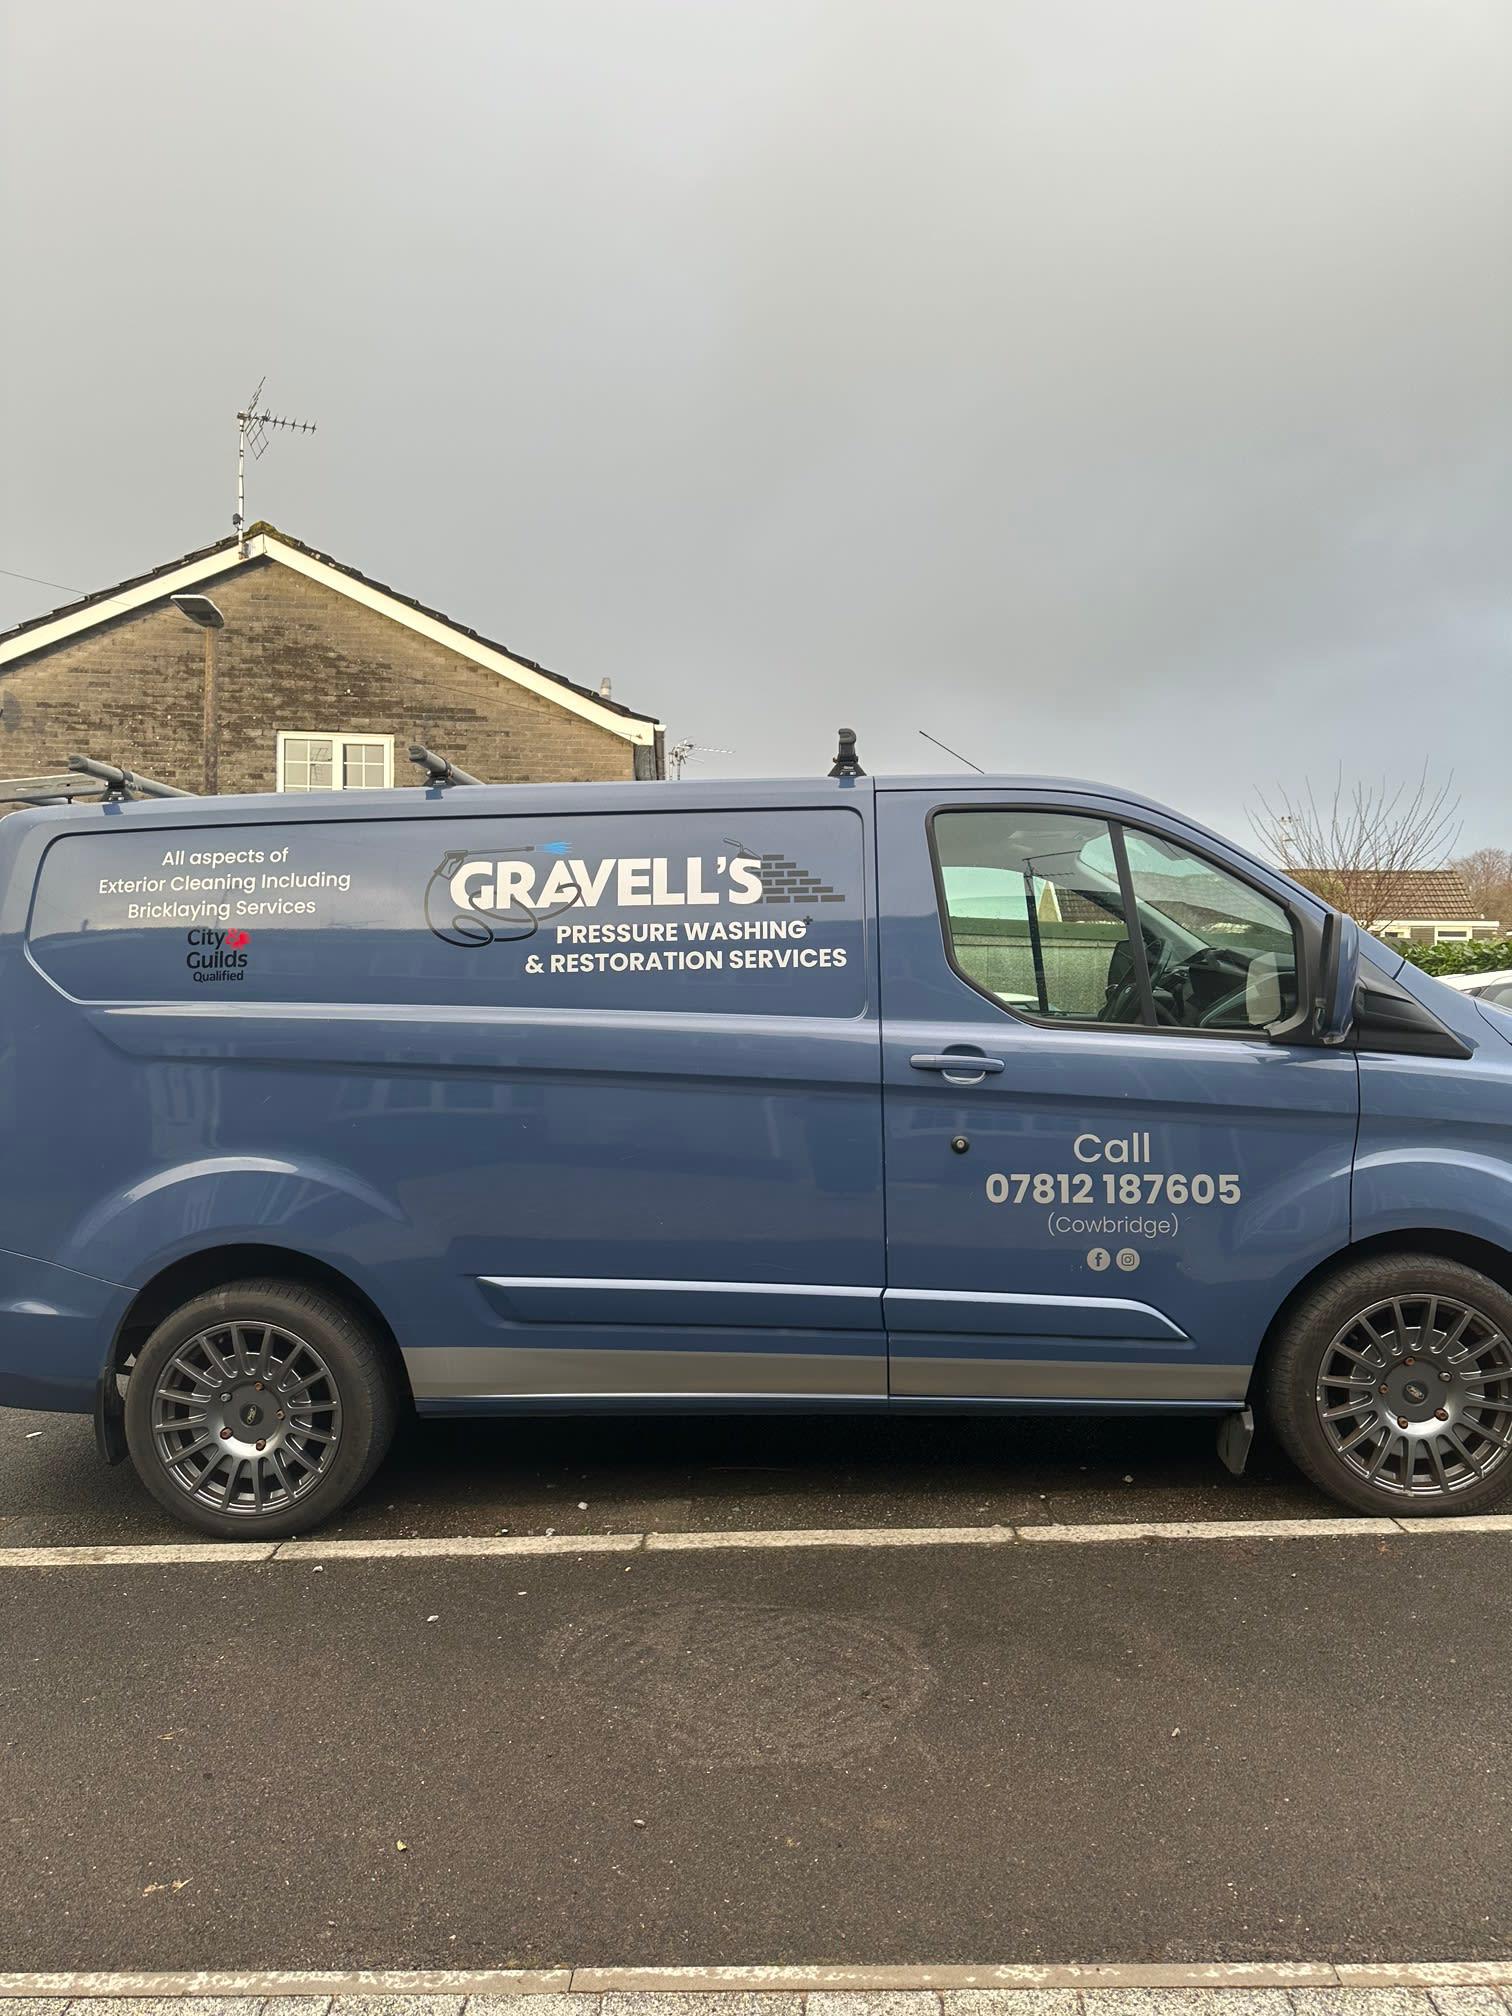 Images Gravell's Pressure Washing